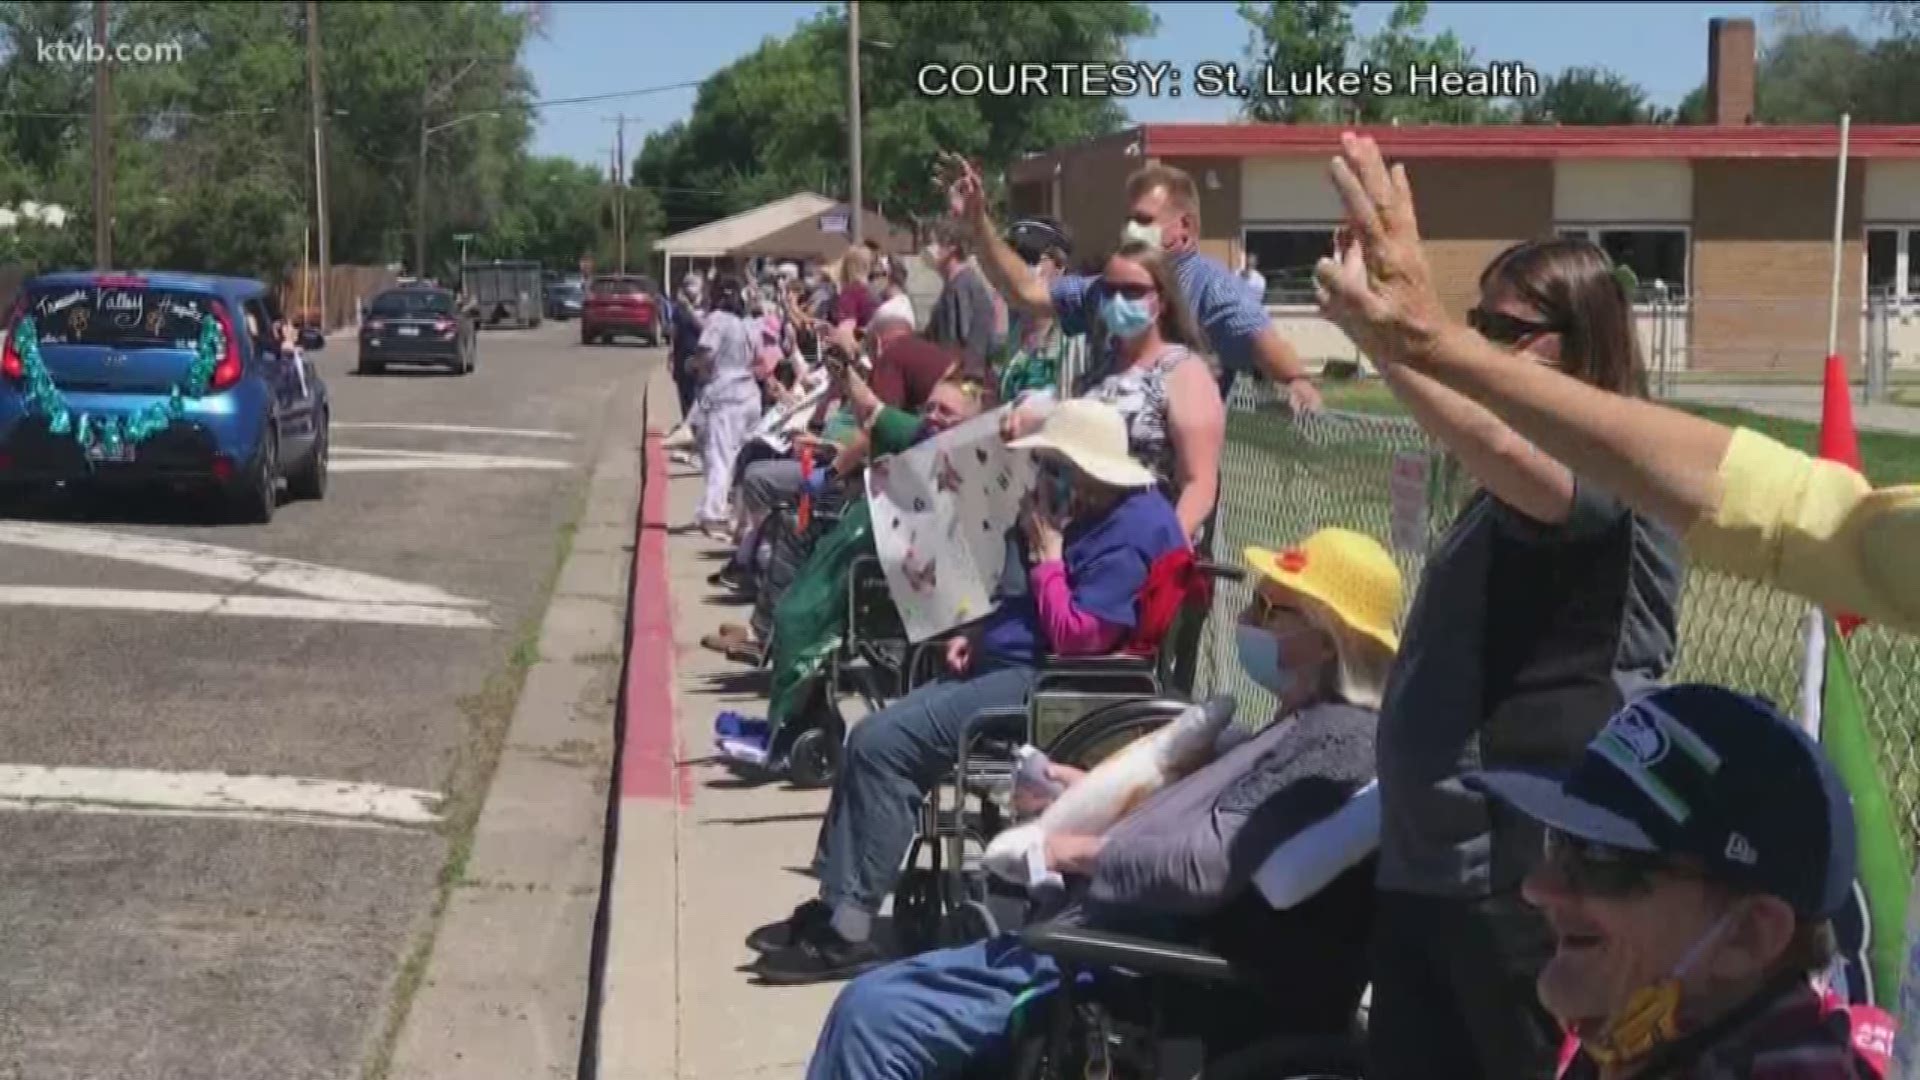 Family members say the parade helped lift the spirits of the long-term care residents.